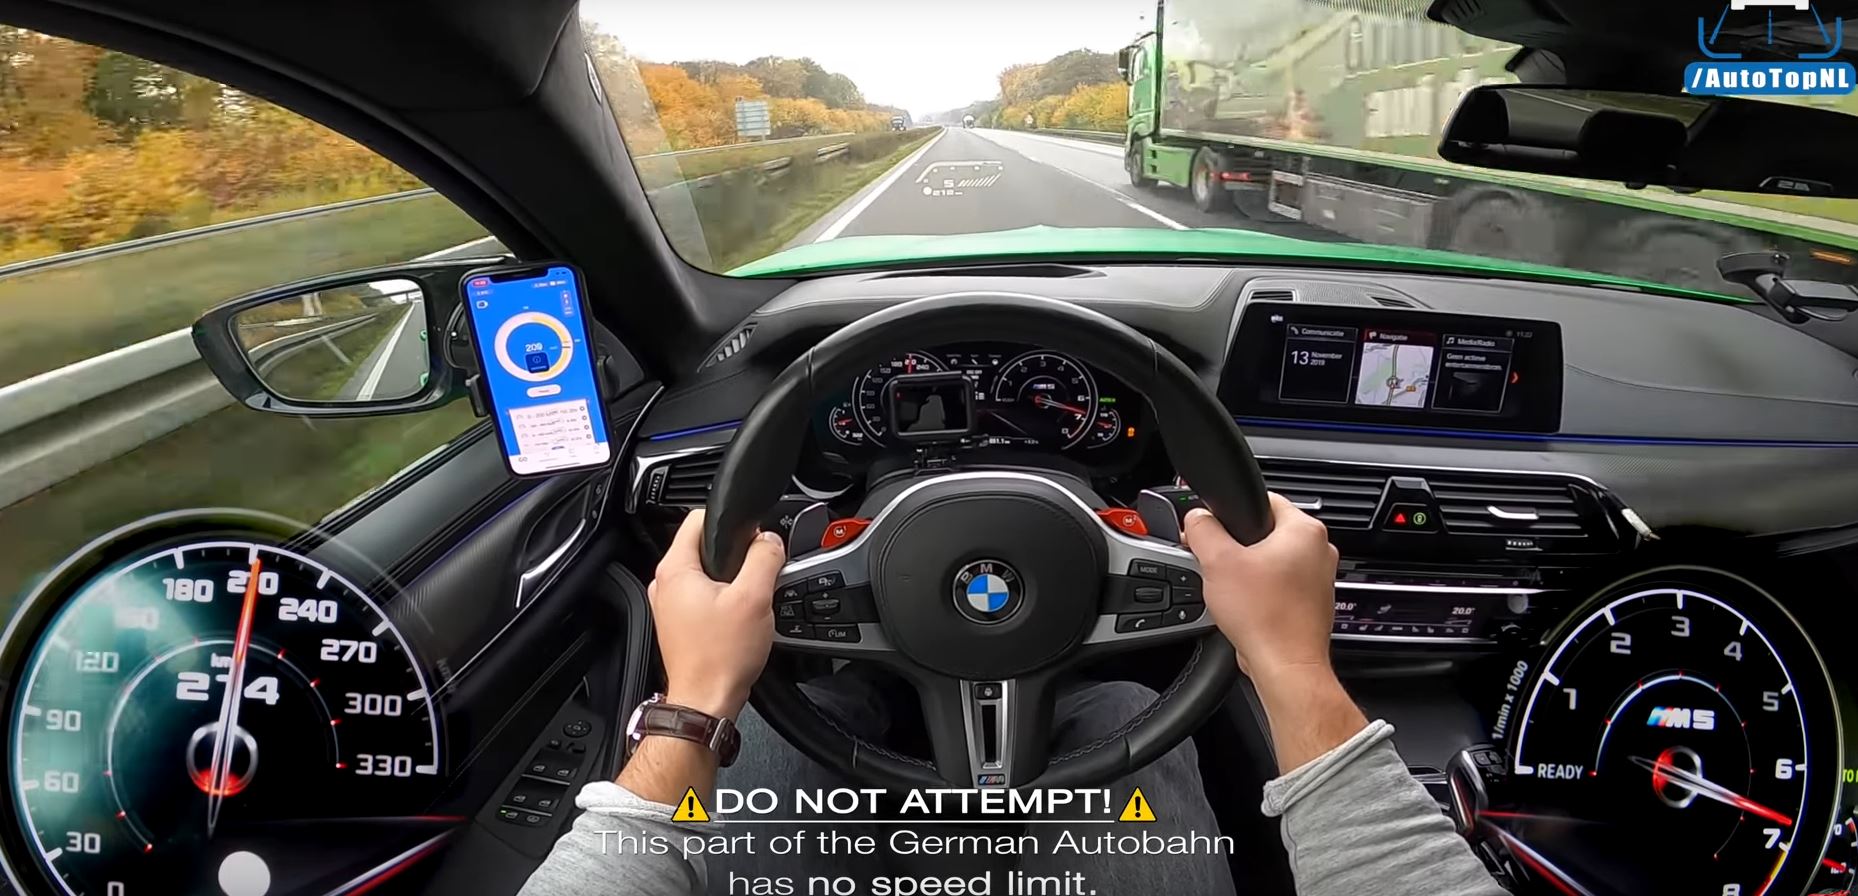 Video: 800 HP BMW M5 Goes for a top speed run in POV video